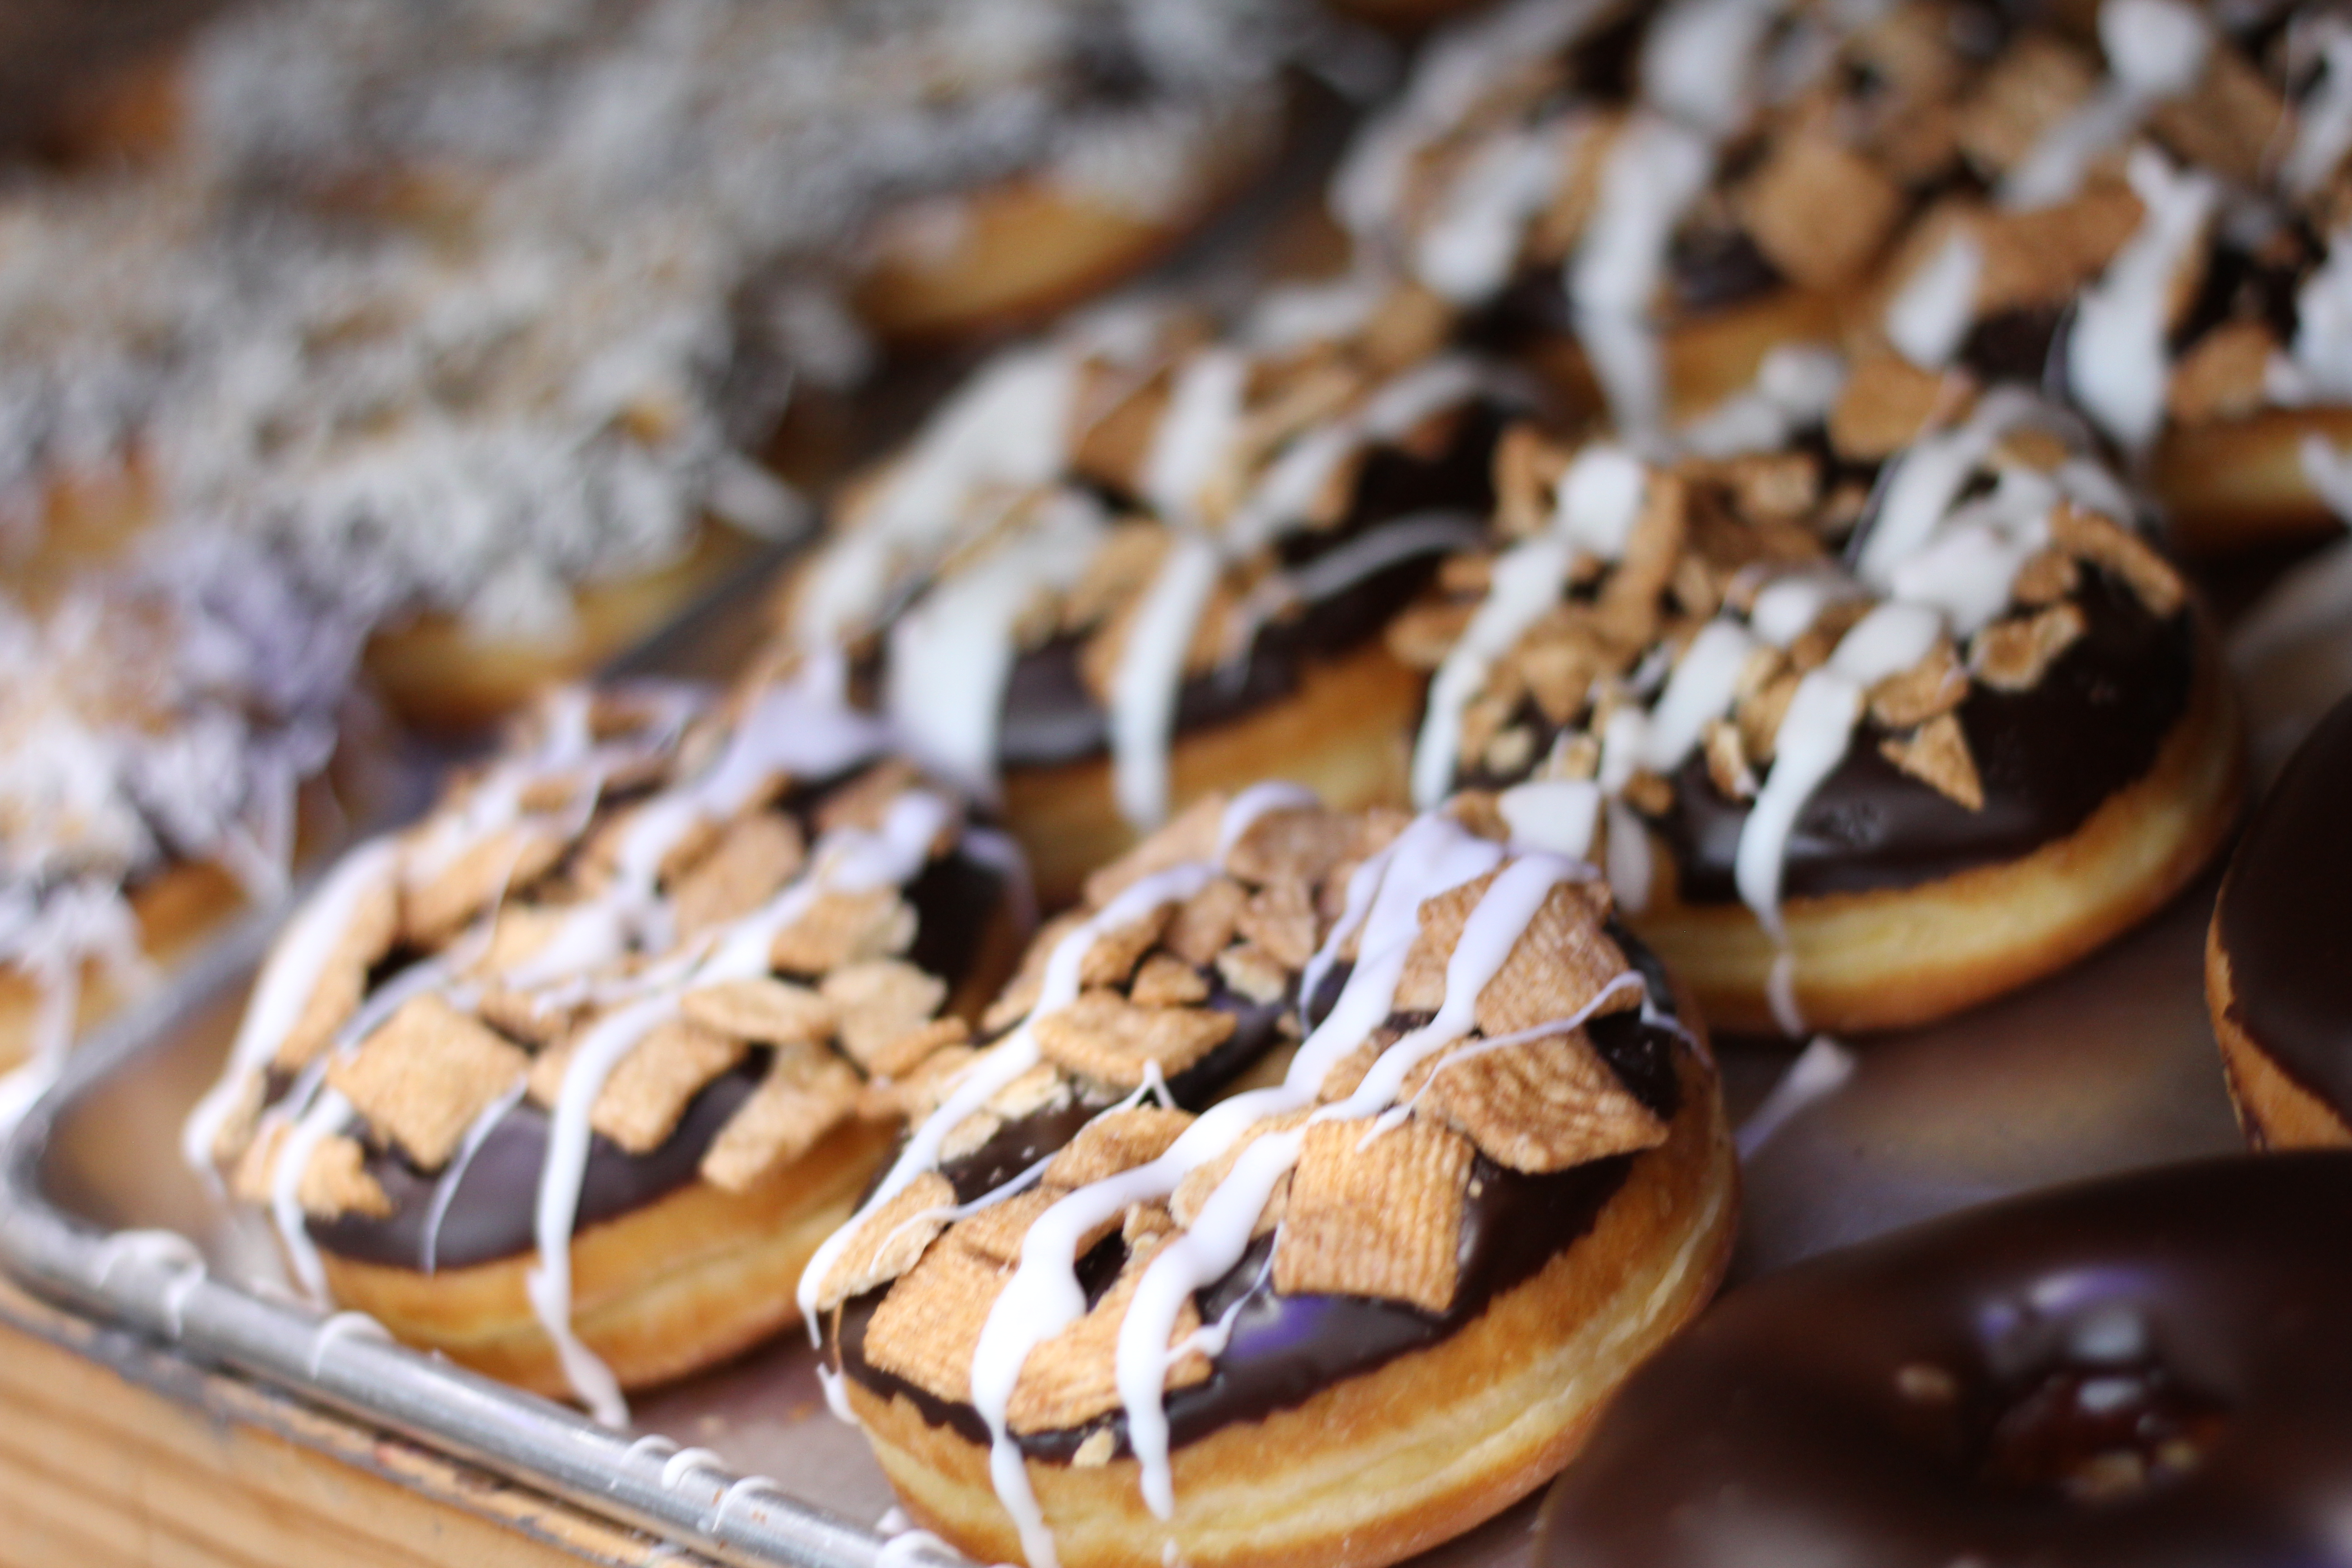 CRAVING A GREAT DONUT? LOOK NO FURTHER THAN DONUT SQUAD